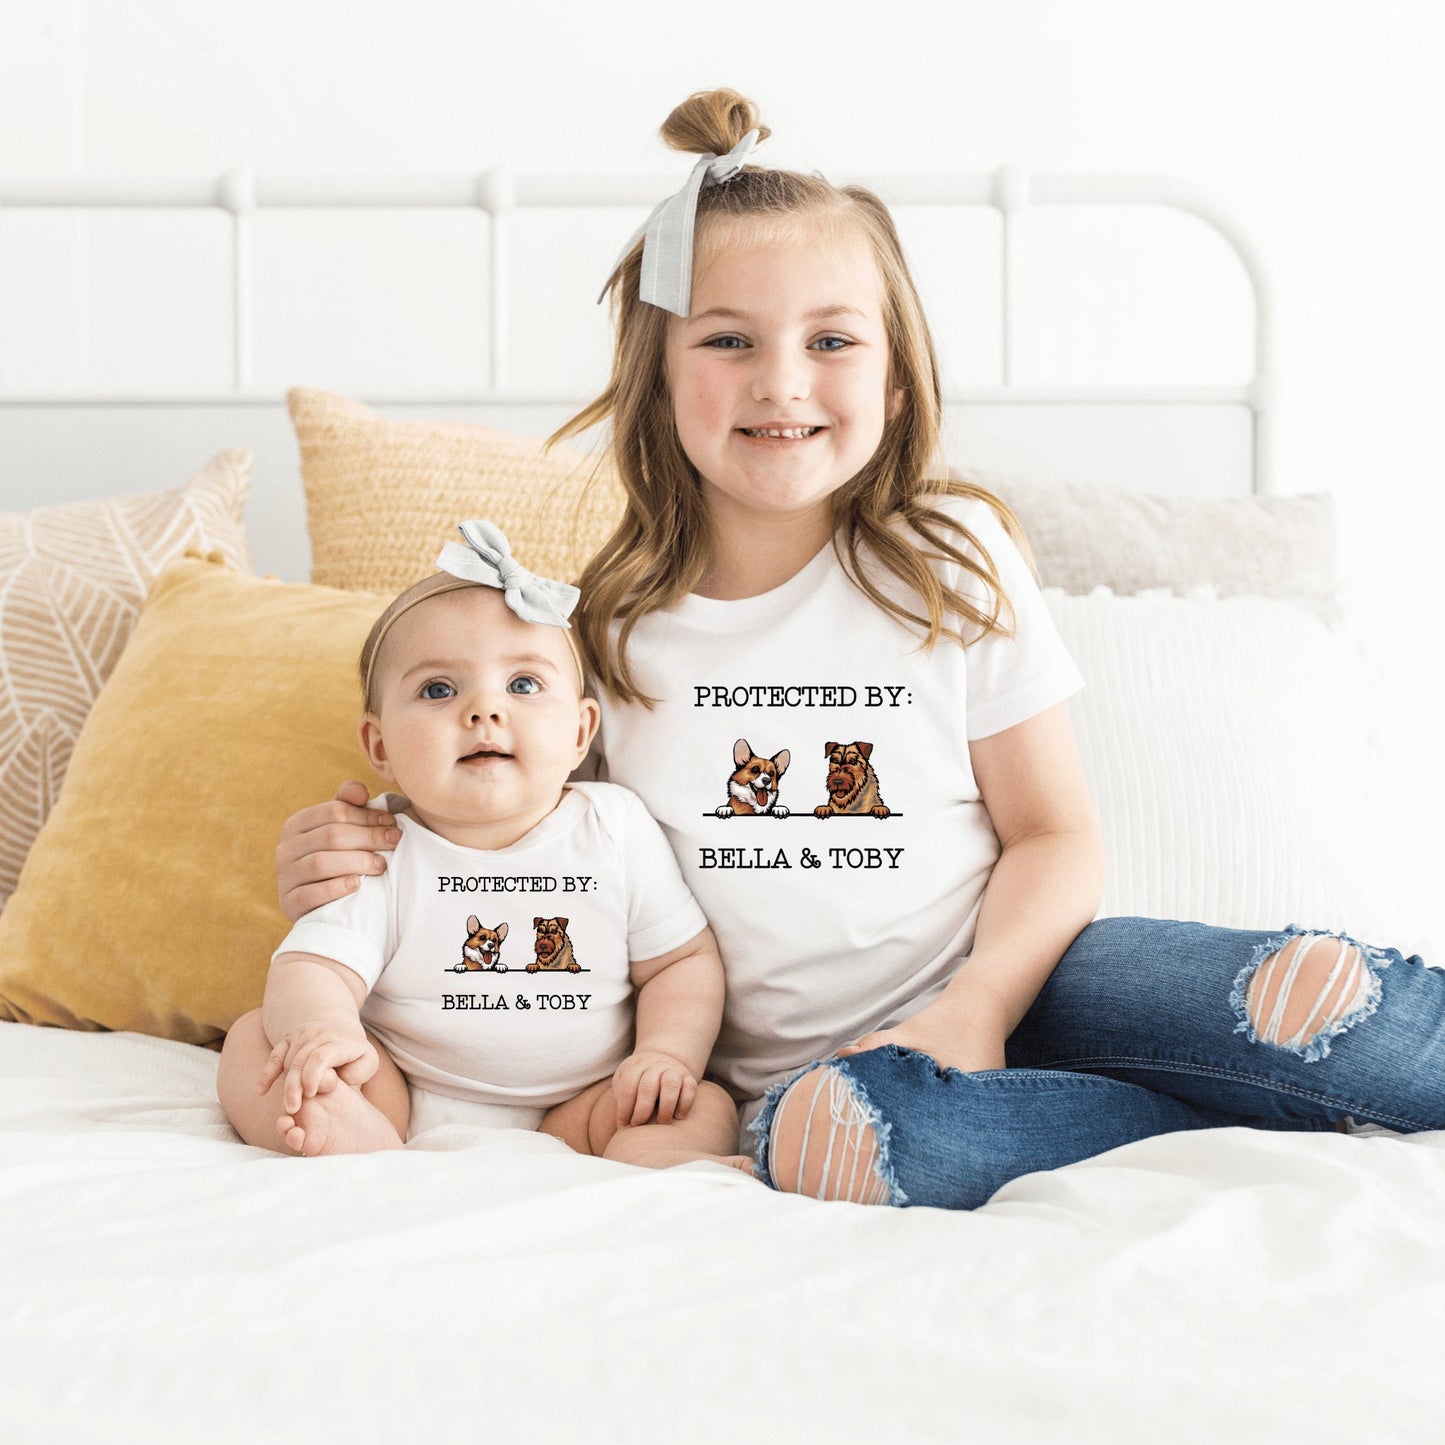 Custom Pet Baby Onesie®, Protected By Dog Baby Onesie® ,Personalized Dog Name Baby Gift, Dog Sibling Outfit, Baby Shower Gift